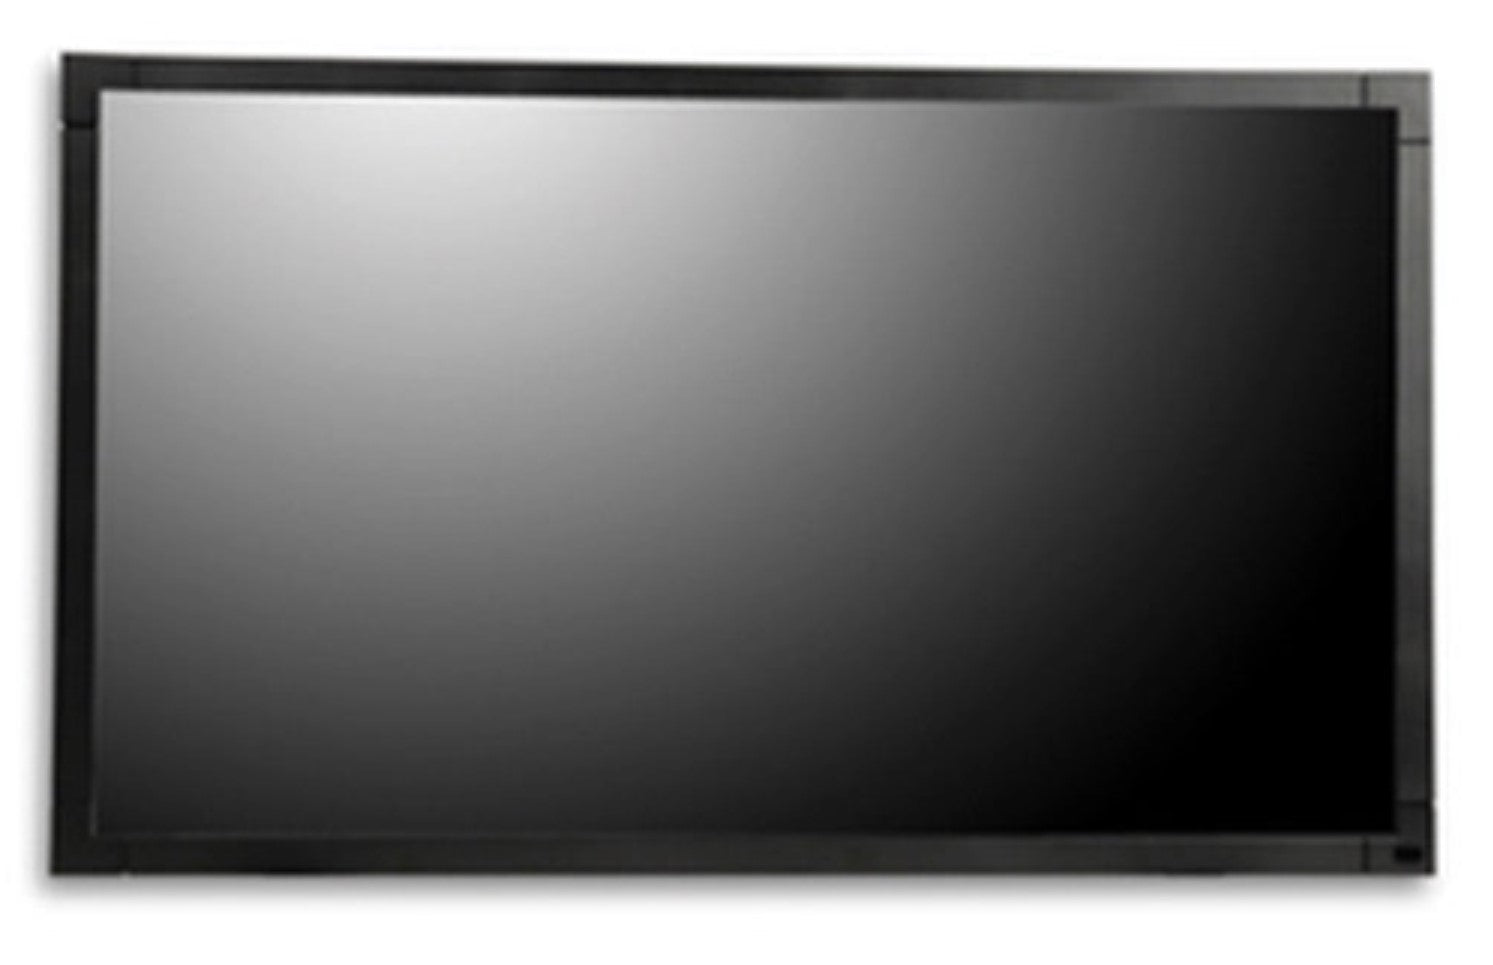 ViewSonic CDP4635-S 46" 1920x1080 4000:1 Contrast Full HD Commercial Display Certified Refurbished